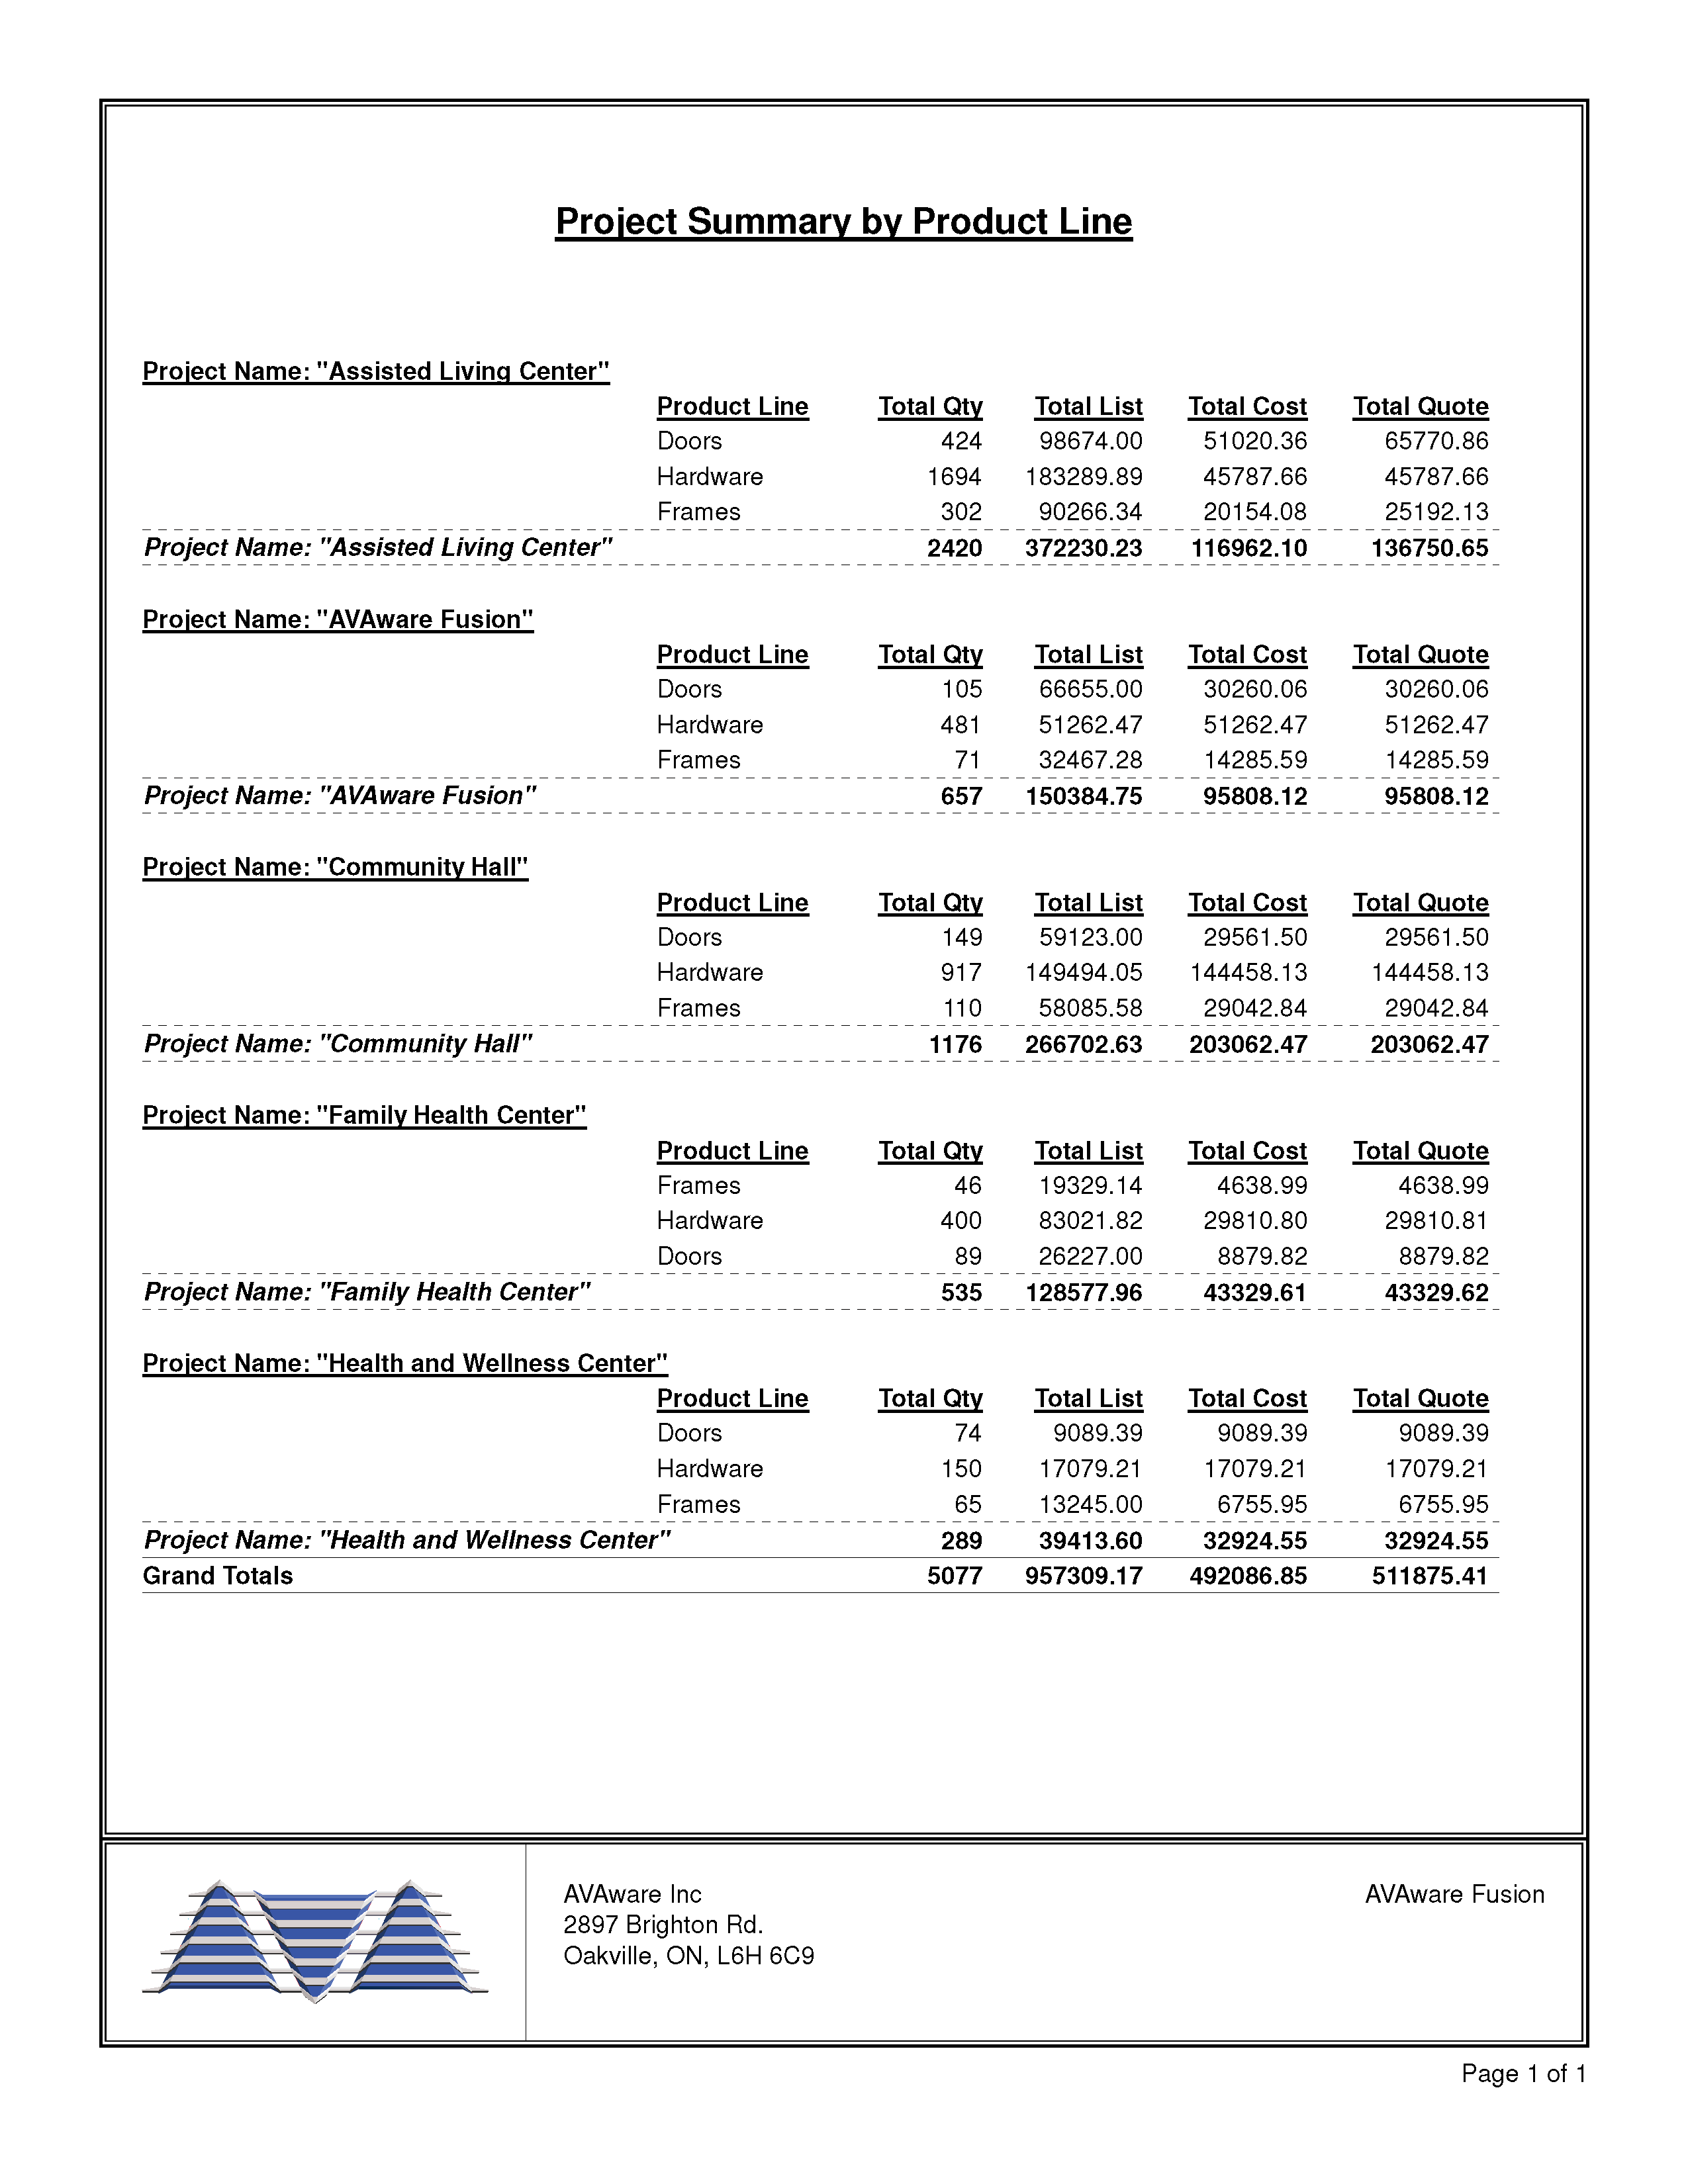 Project Summary by Product Line Page 1